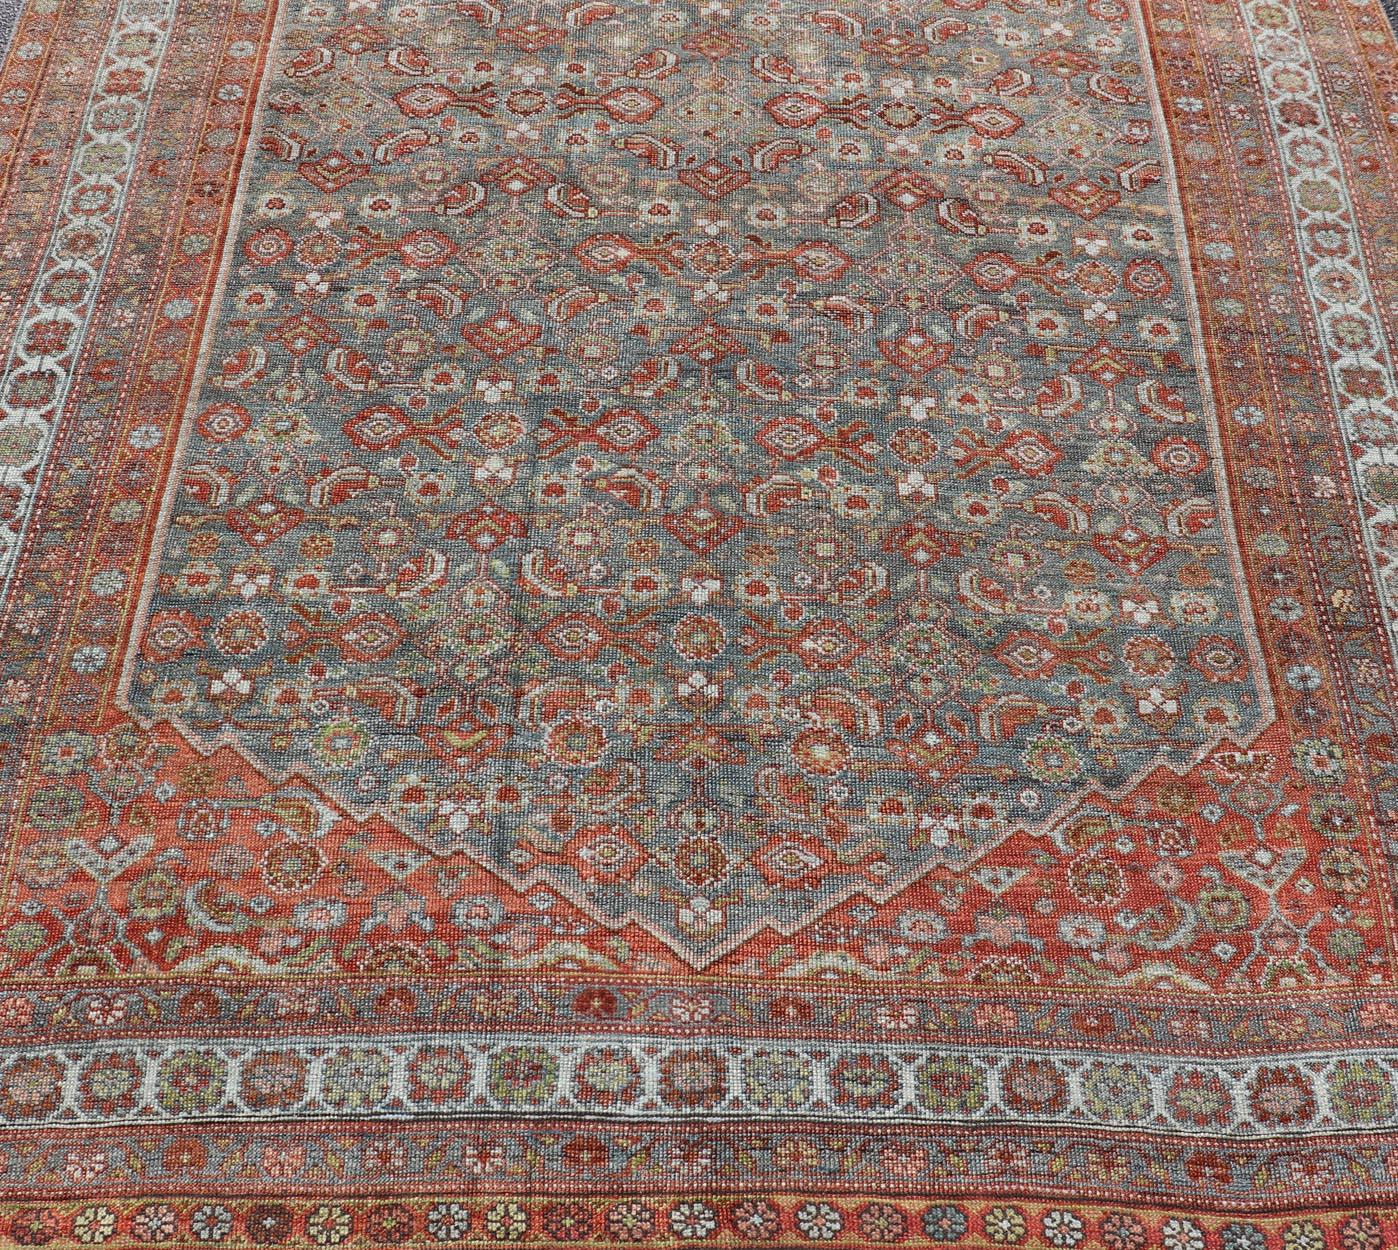 Large Kurdish Antique All Over Design Gallery Runner in Muted Tones Of Blue-Gray. Keivan Woven Arts: rug V21-1217-15474 Country of Origin: Iran Type: Kurdish Circa 1900
Measures: 7'10 x 22'0 
This magnificent Kurdish antique gallery runner has held